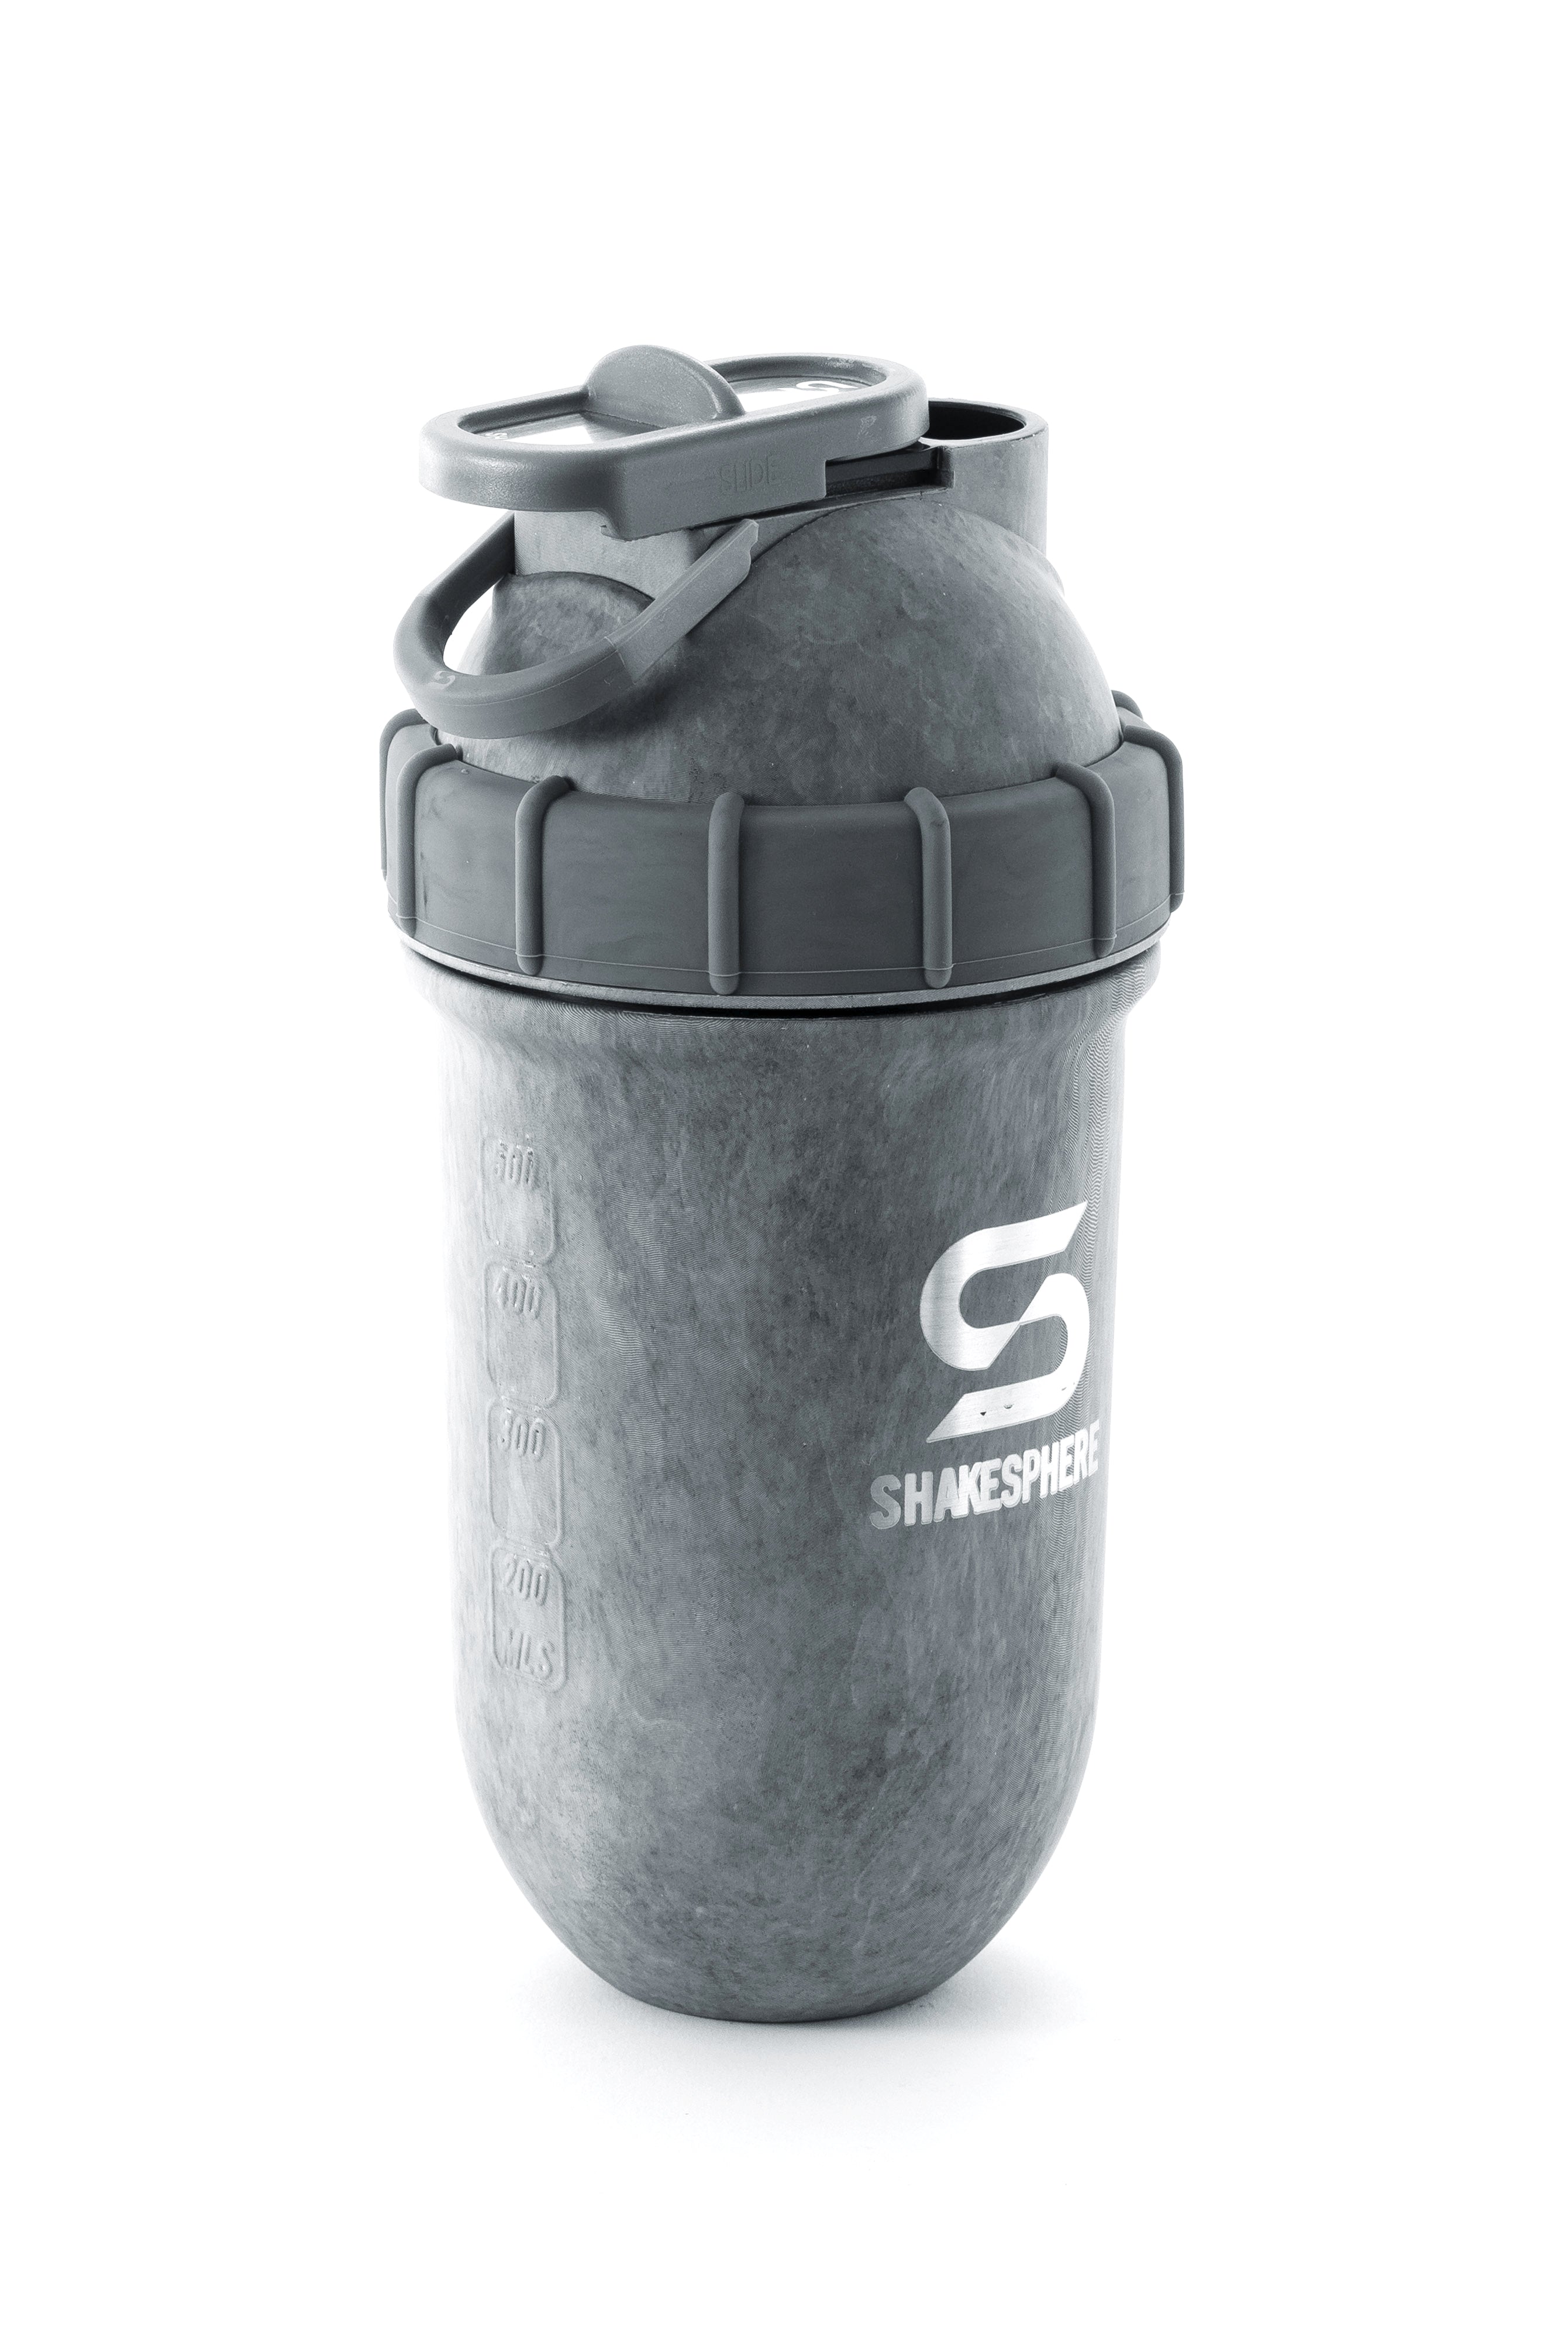 ShakeSphere Tumbler View: Protein Shaker Bottle with Side Window